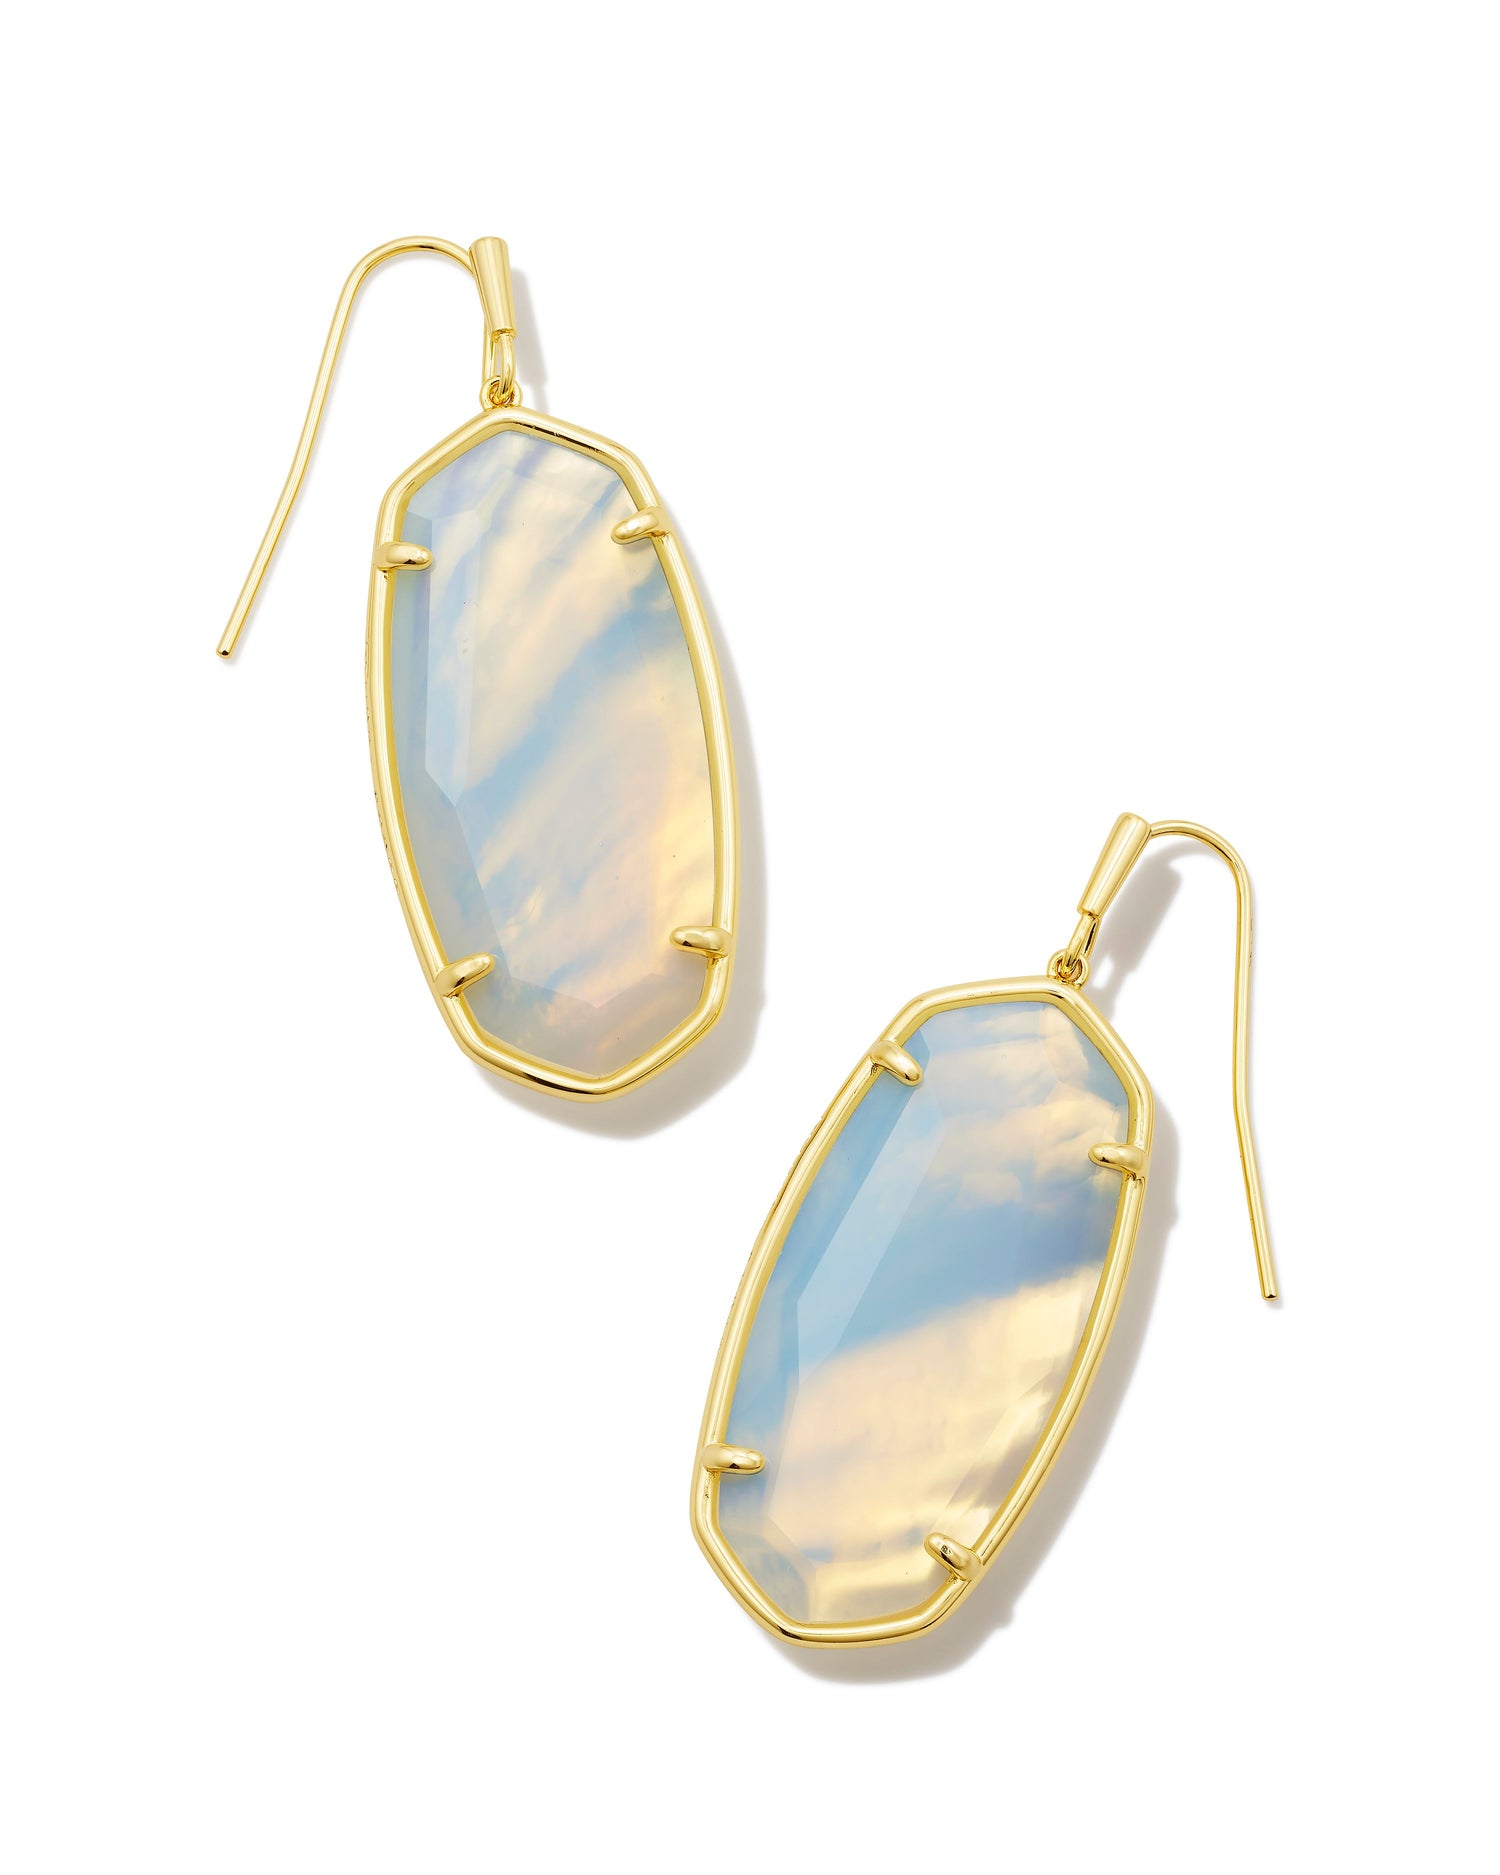 The Elle style you know and love shines brighter than ever in the Faceted Gold Elle Drop Earrings in Iridescent Opalite Illusion. A faceted stone face reflects light from all angles, letting our iconic silhouette radiate a gorgeous shine.